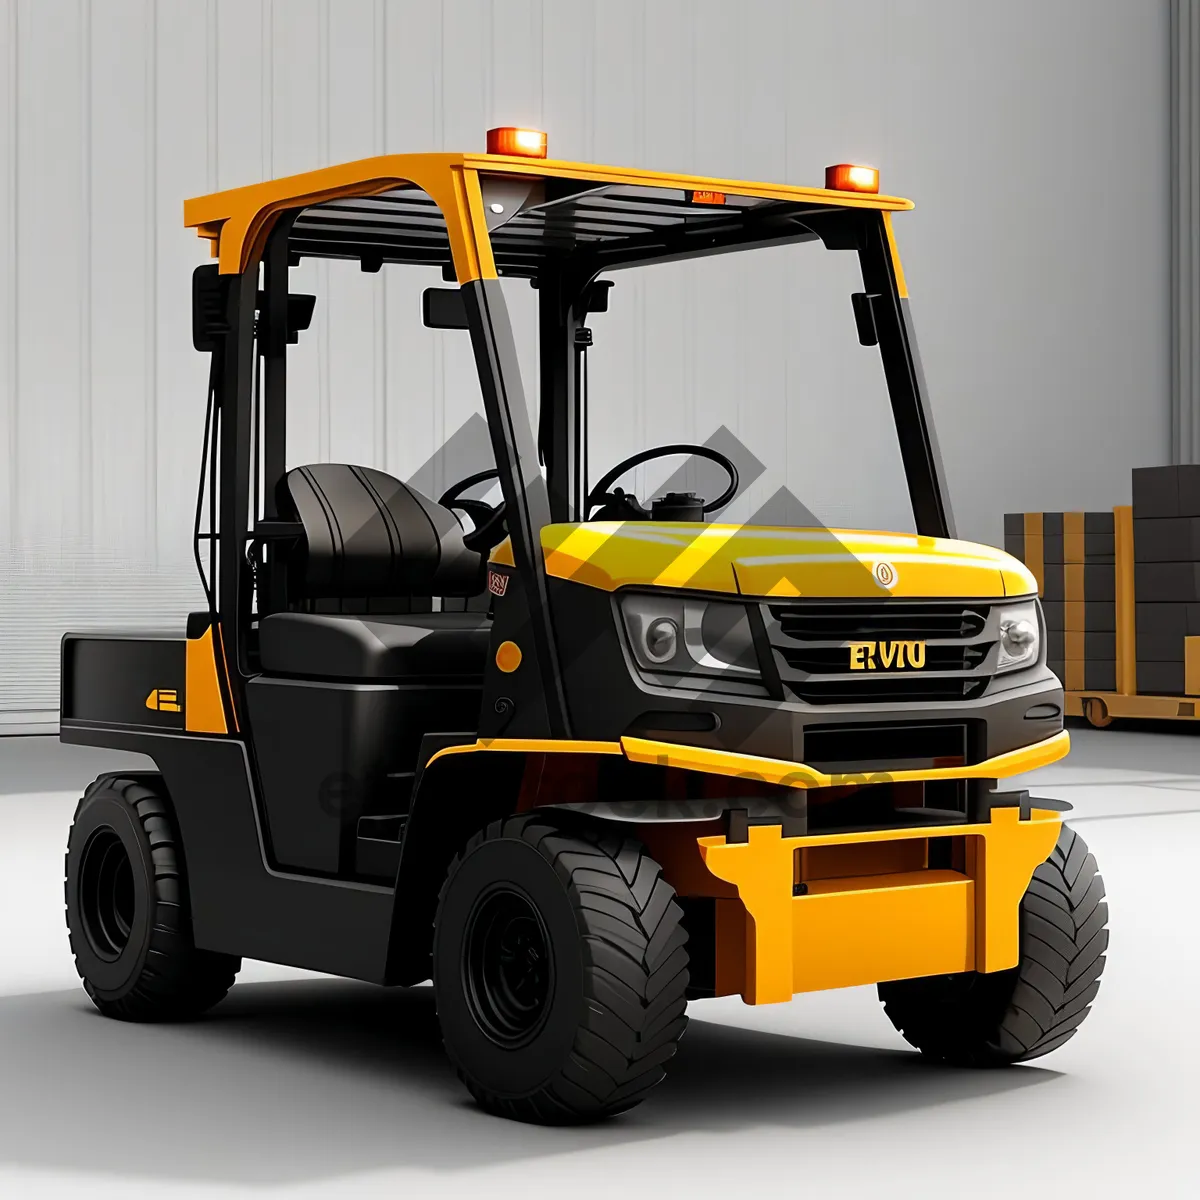 Picture of Yellow Heavy-duty Forklift Truck with Loader Bucket